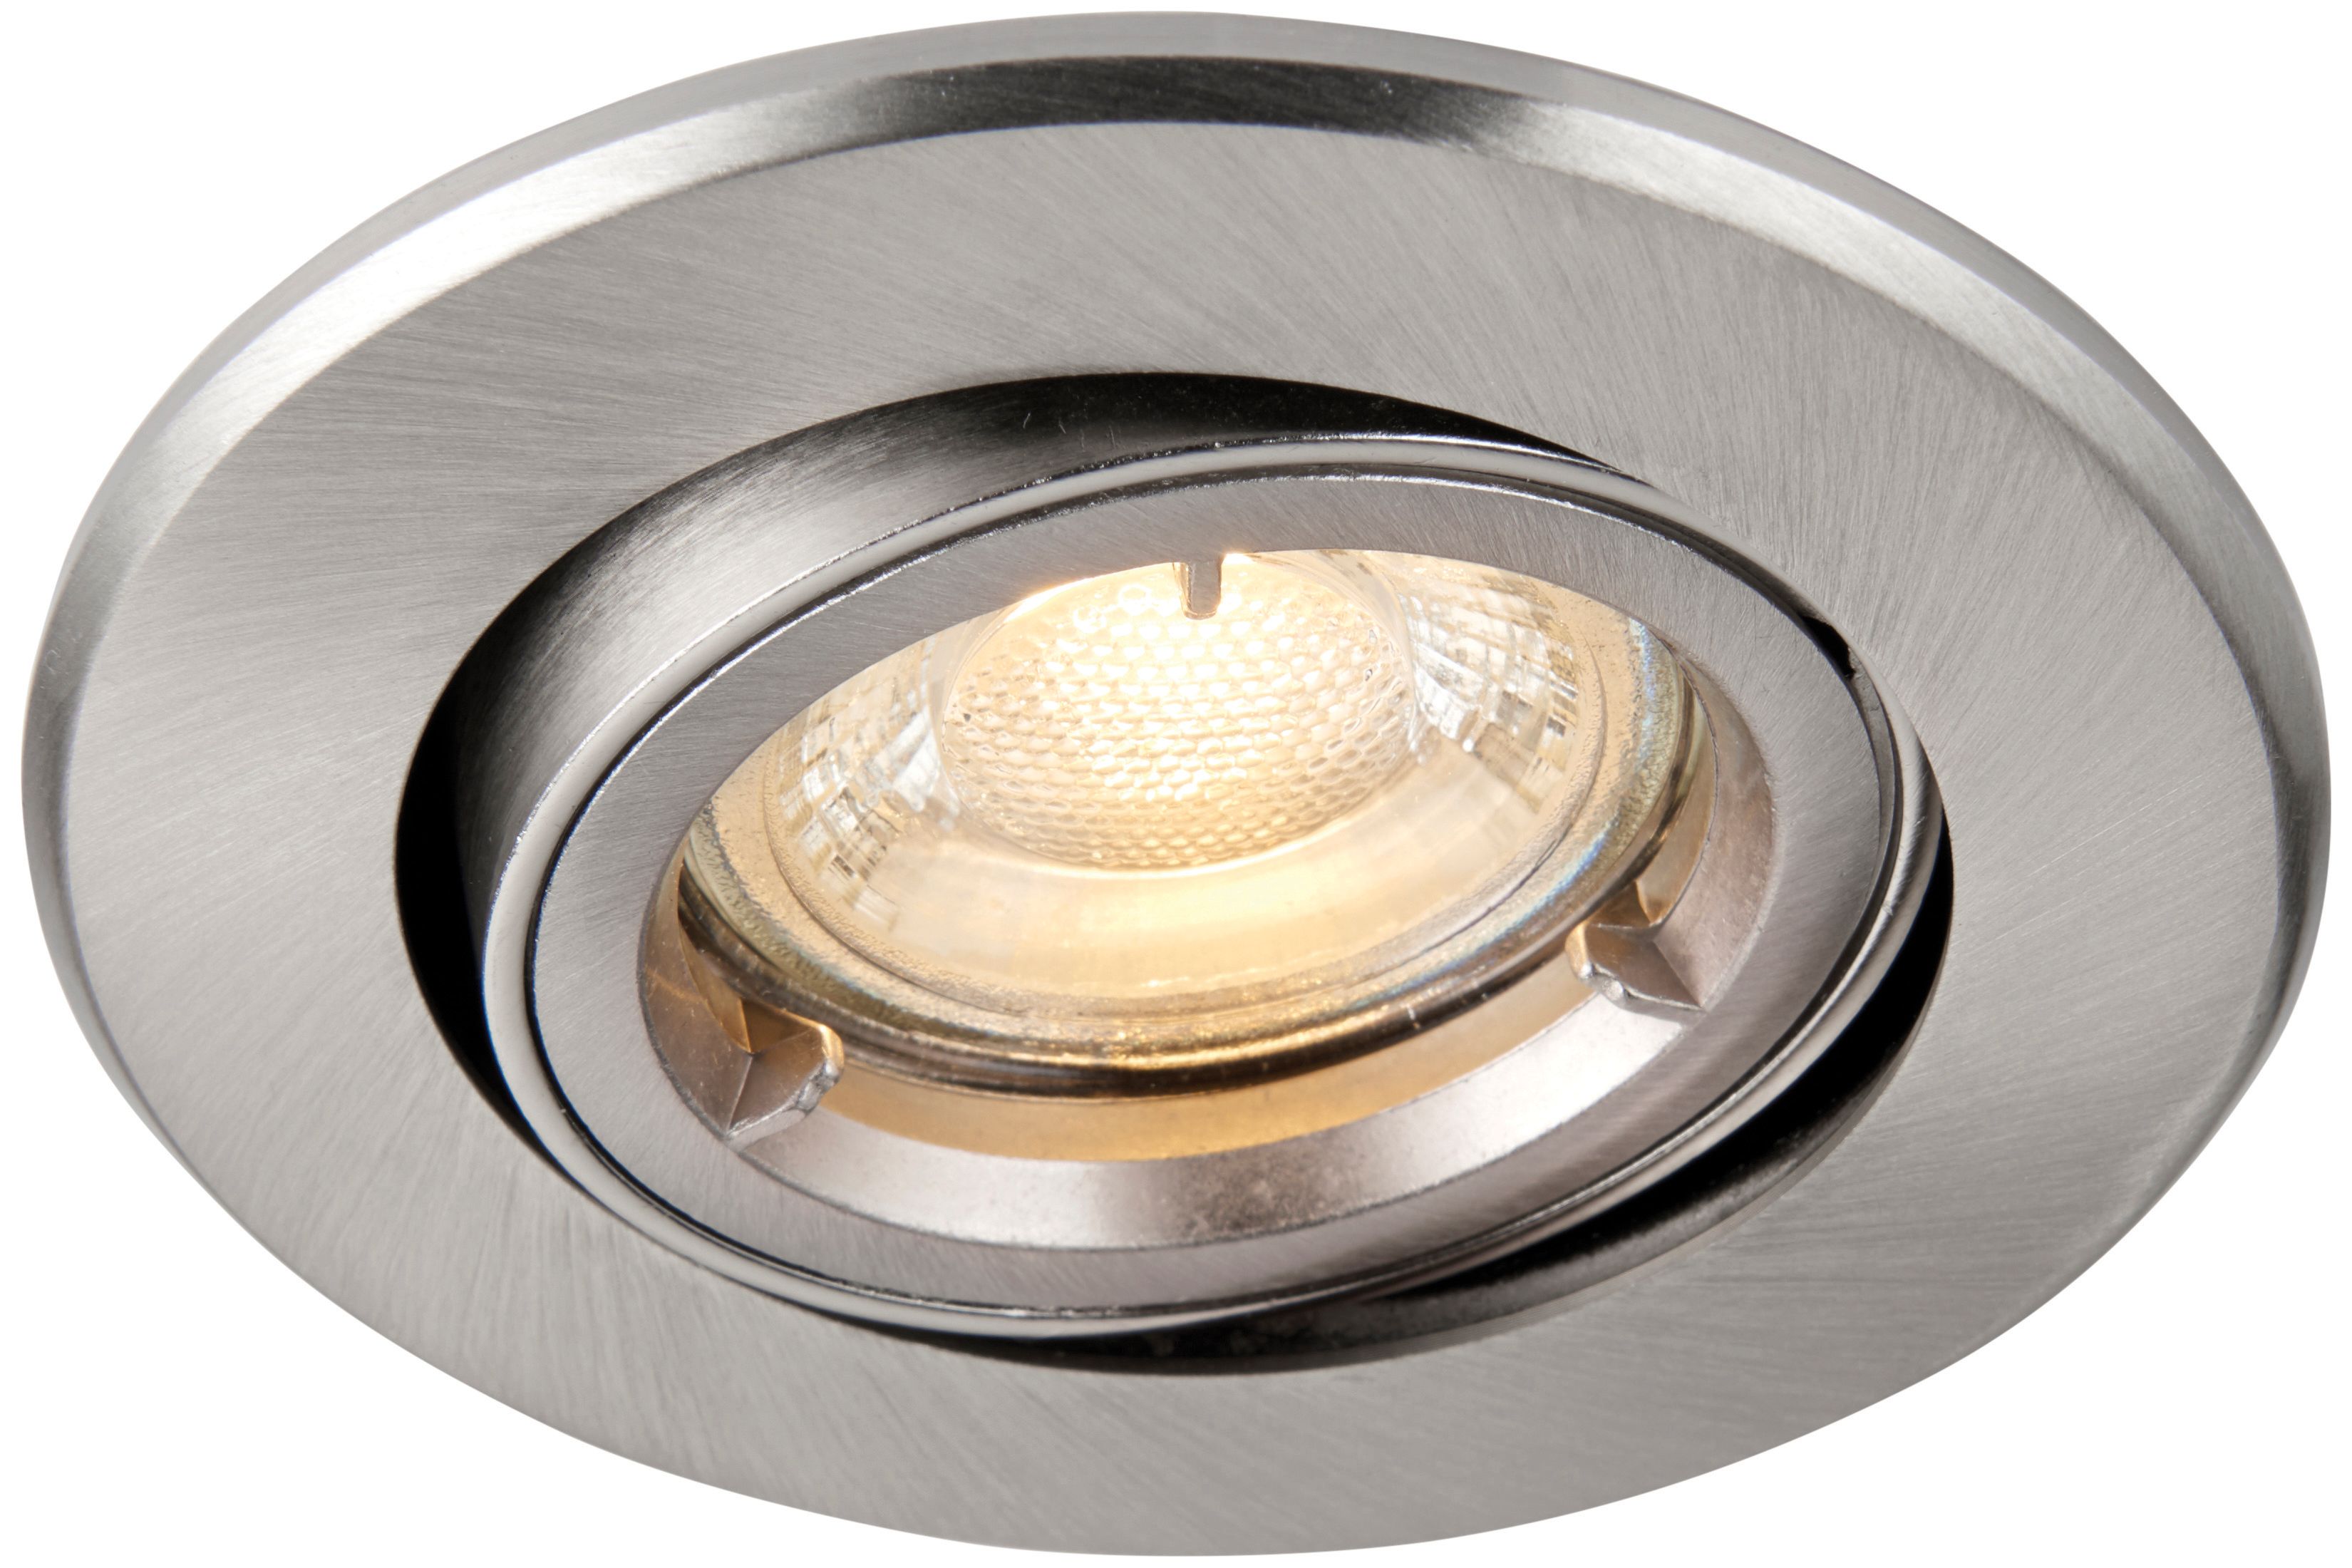 Saxby GU10 Satin Nickel Fire Rated Cast Adjustable Downlight - 50W